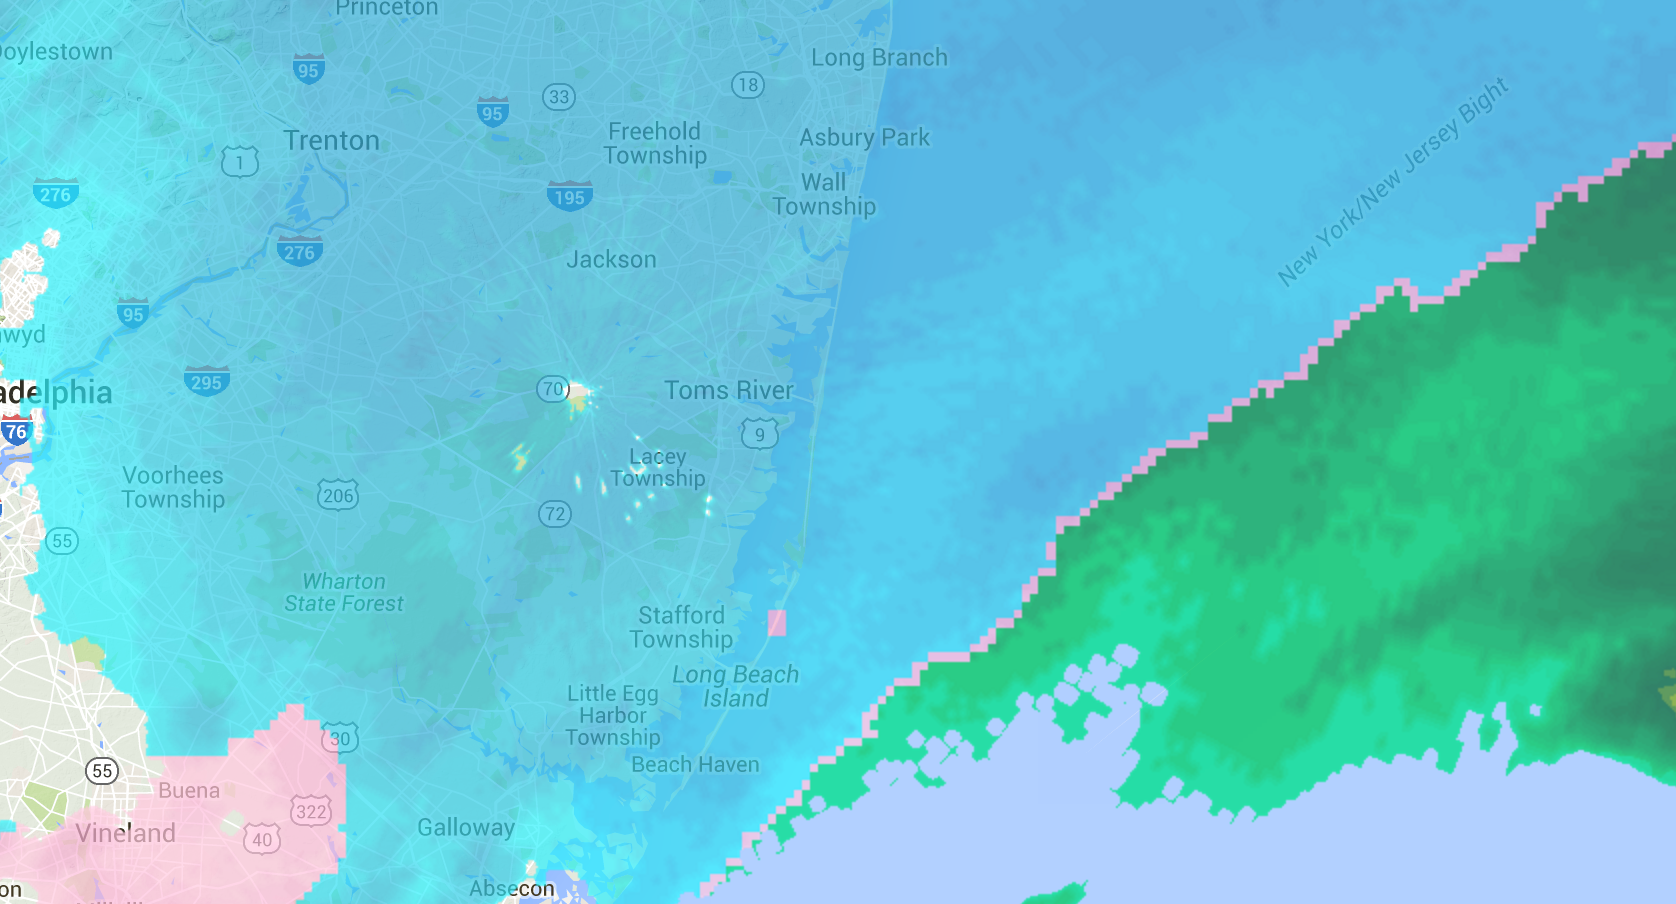  Radar image at 7:50 a.m. today, showing heavy snow at the Jersey Shore. 